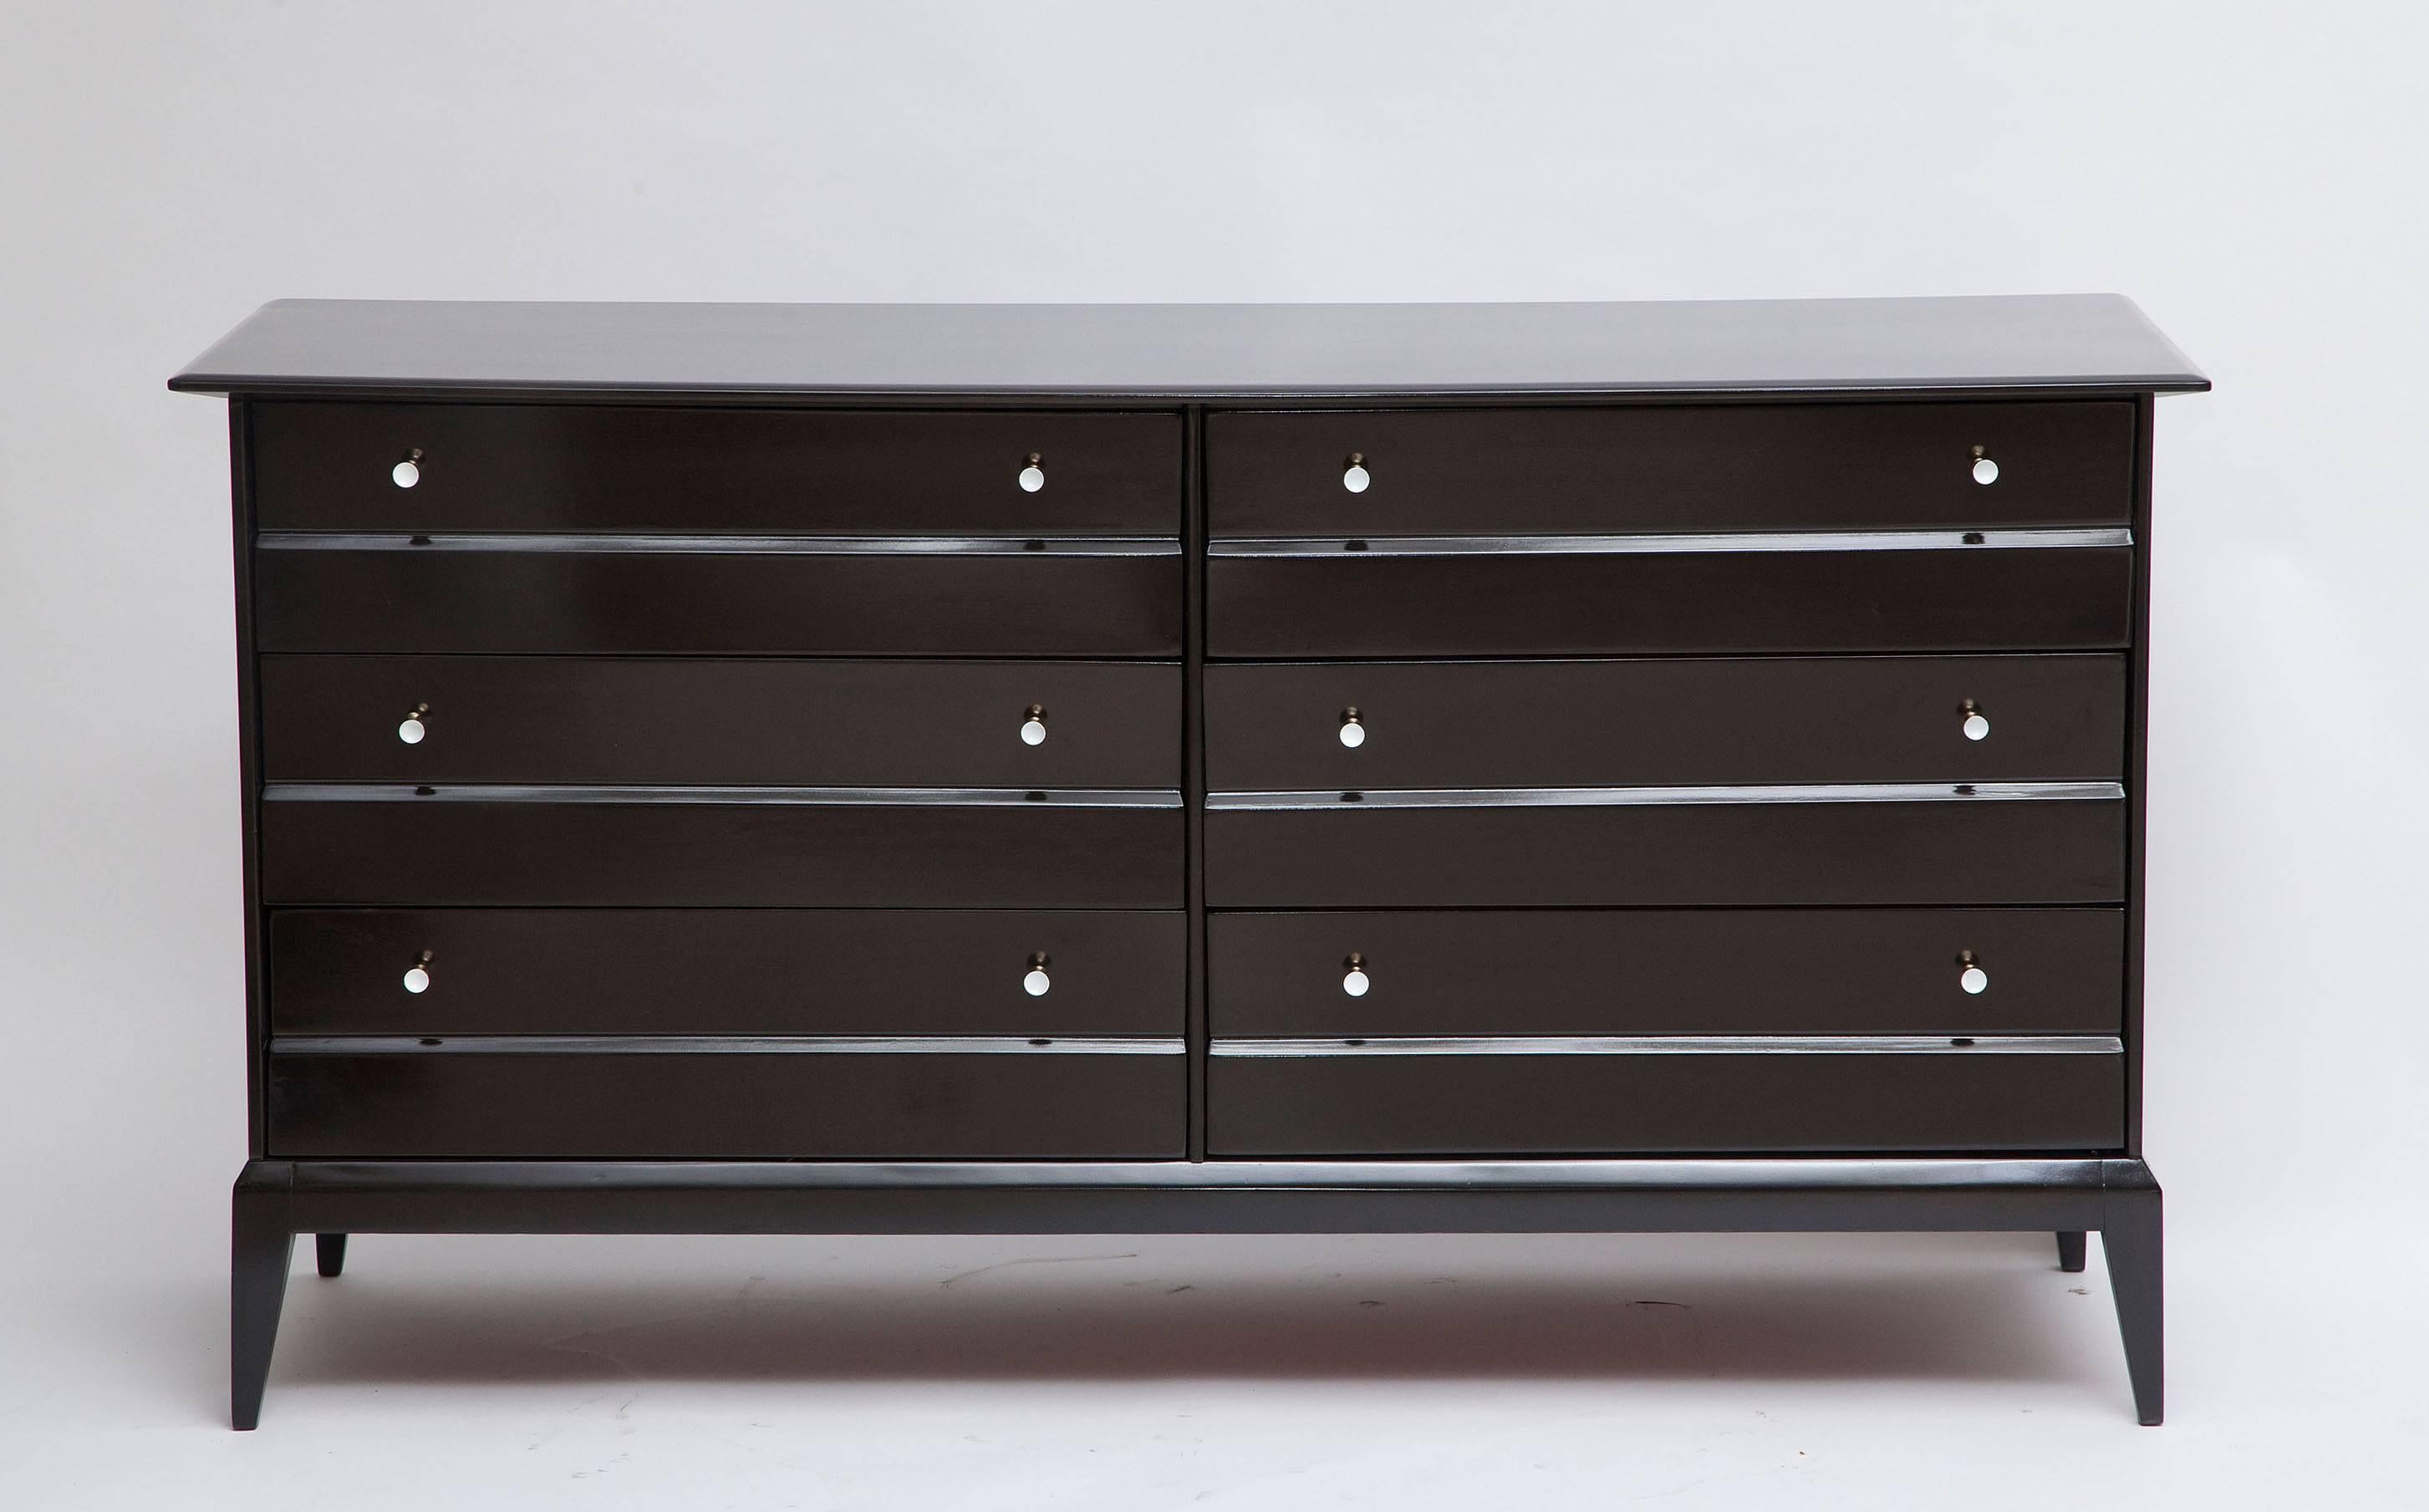 Snappy, clean-lined, six-drawer dresser by Heywood-Wakefield. Ebonized walnut and original, cute-as-a-button solid brass knobs with white enamel centers. Newly re-finished.